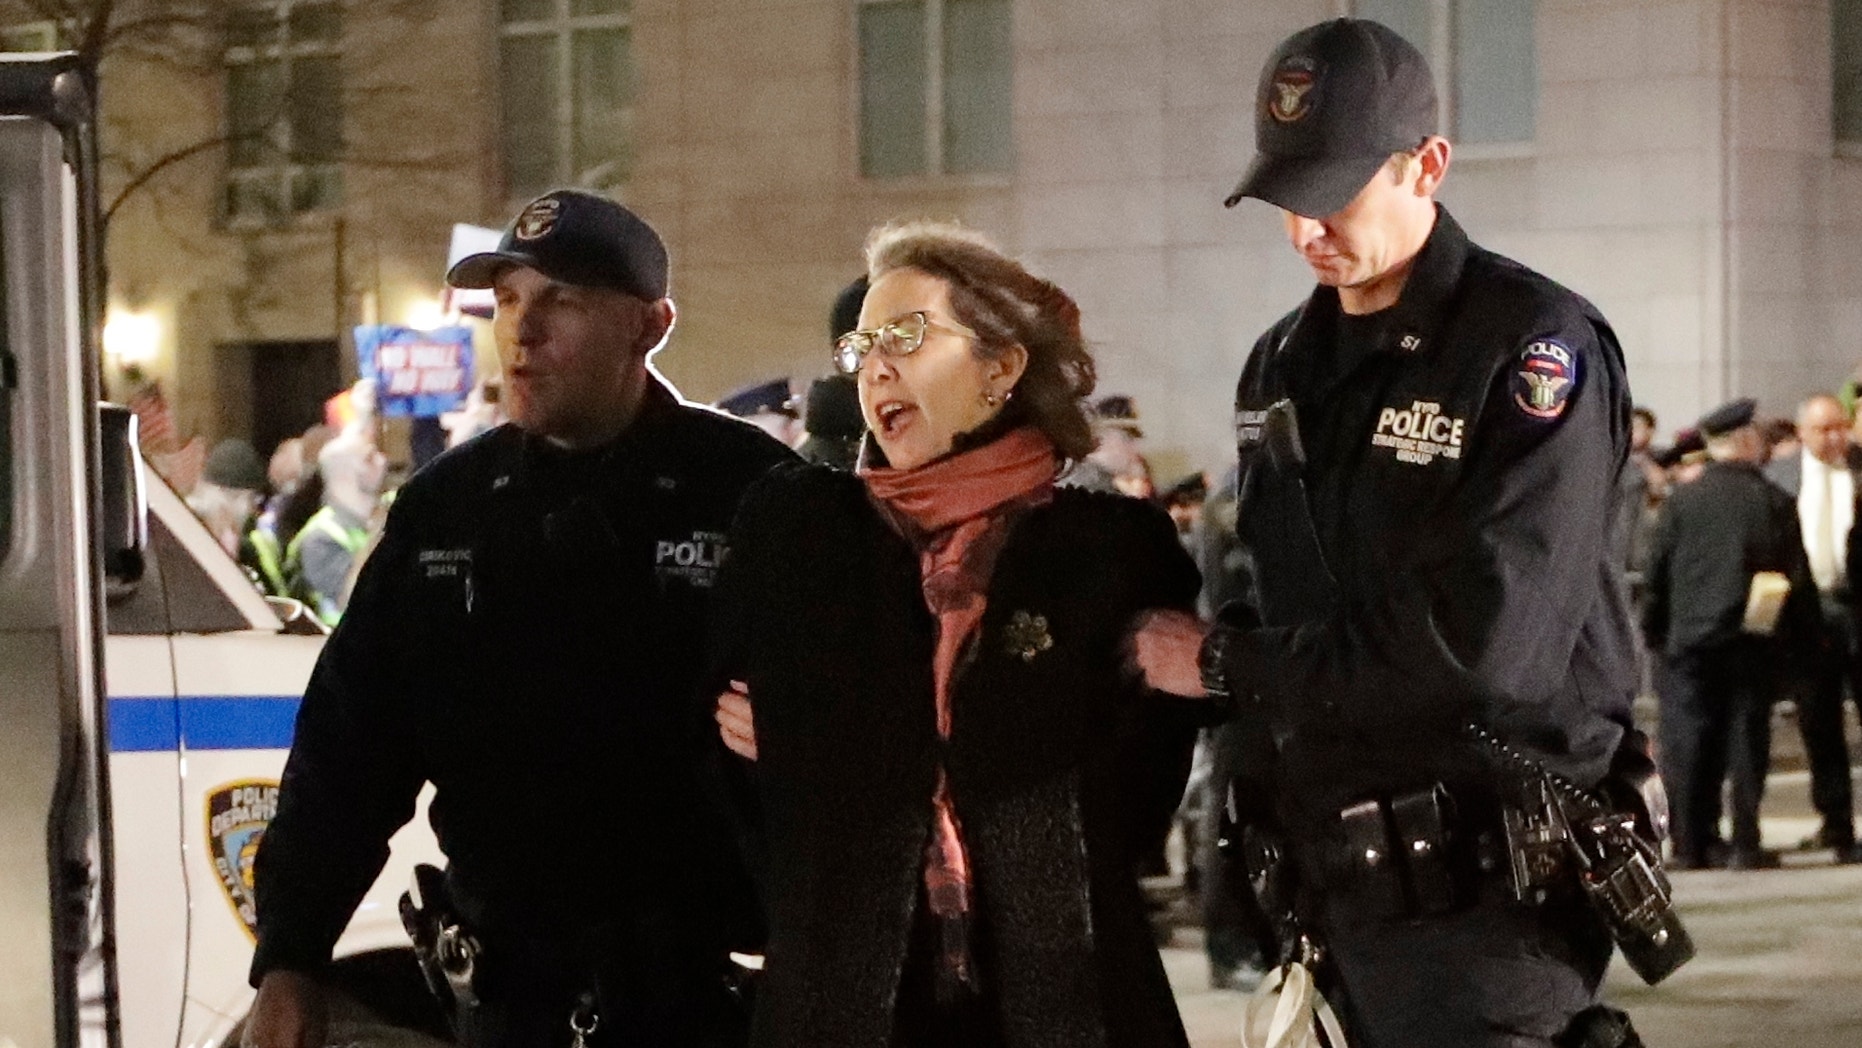 A protester is taken into custody outside Trump International Hotel &amp; Tower on Friday, Feb. 15, 2019, in New York. Some people have been arrested while protesting President Donald Trump's national emergency declaration. The NYPD wasn't immediately able to say how many people were taken into custody outside the hotel. (AP Photo/Frank Franklin II)